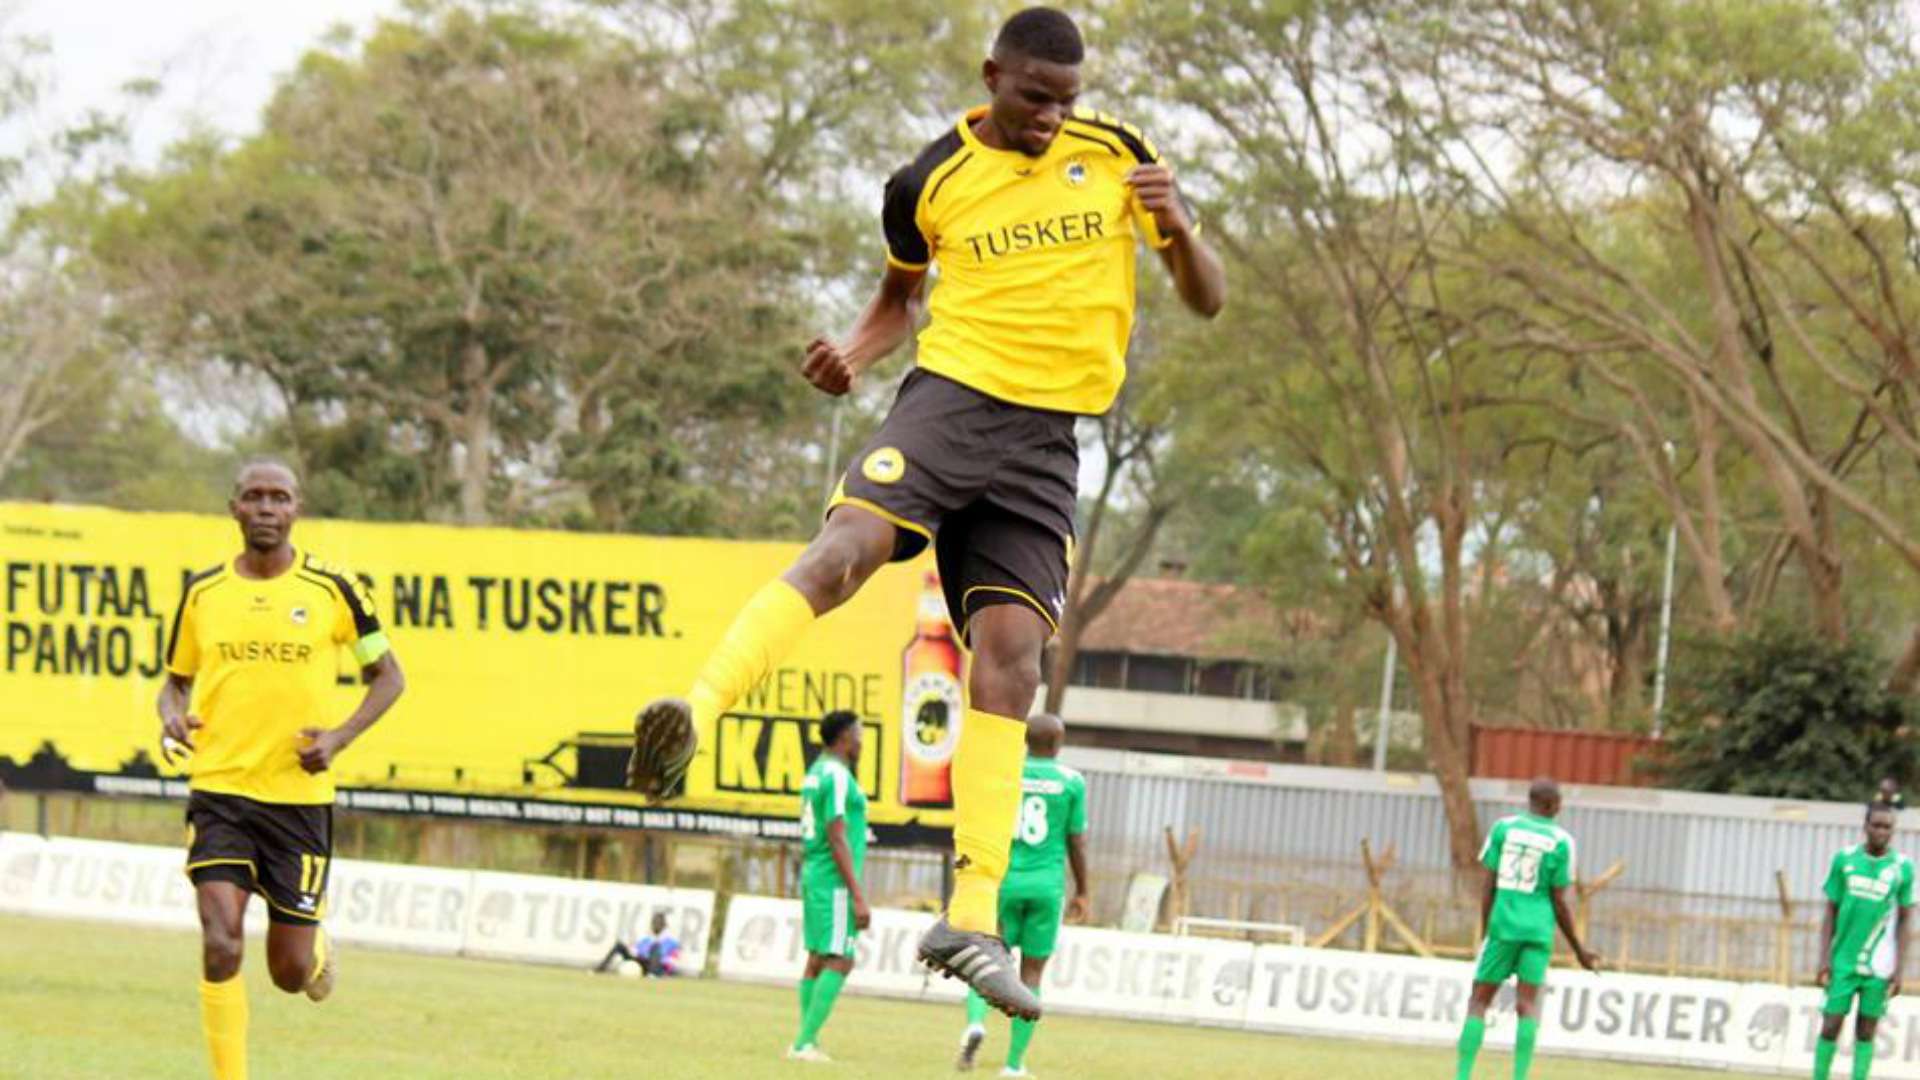 Justine Omary of Tusker.